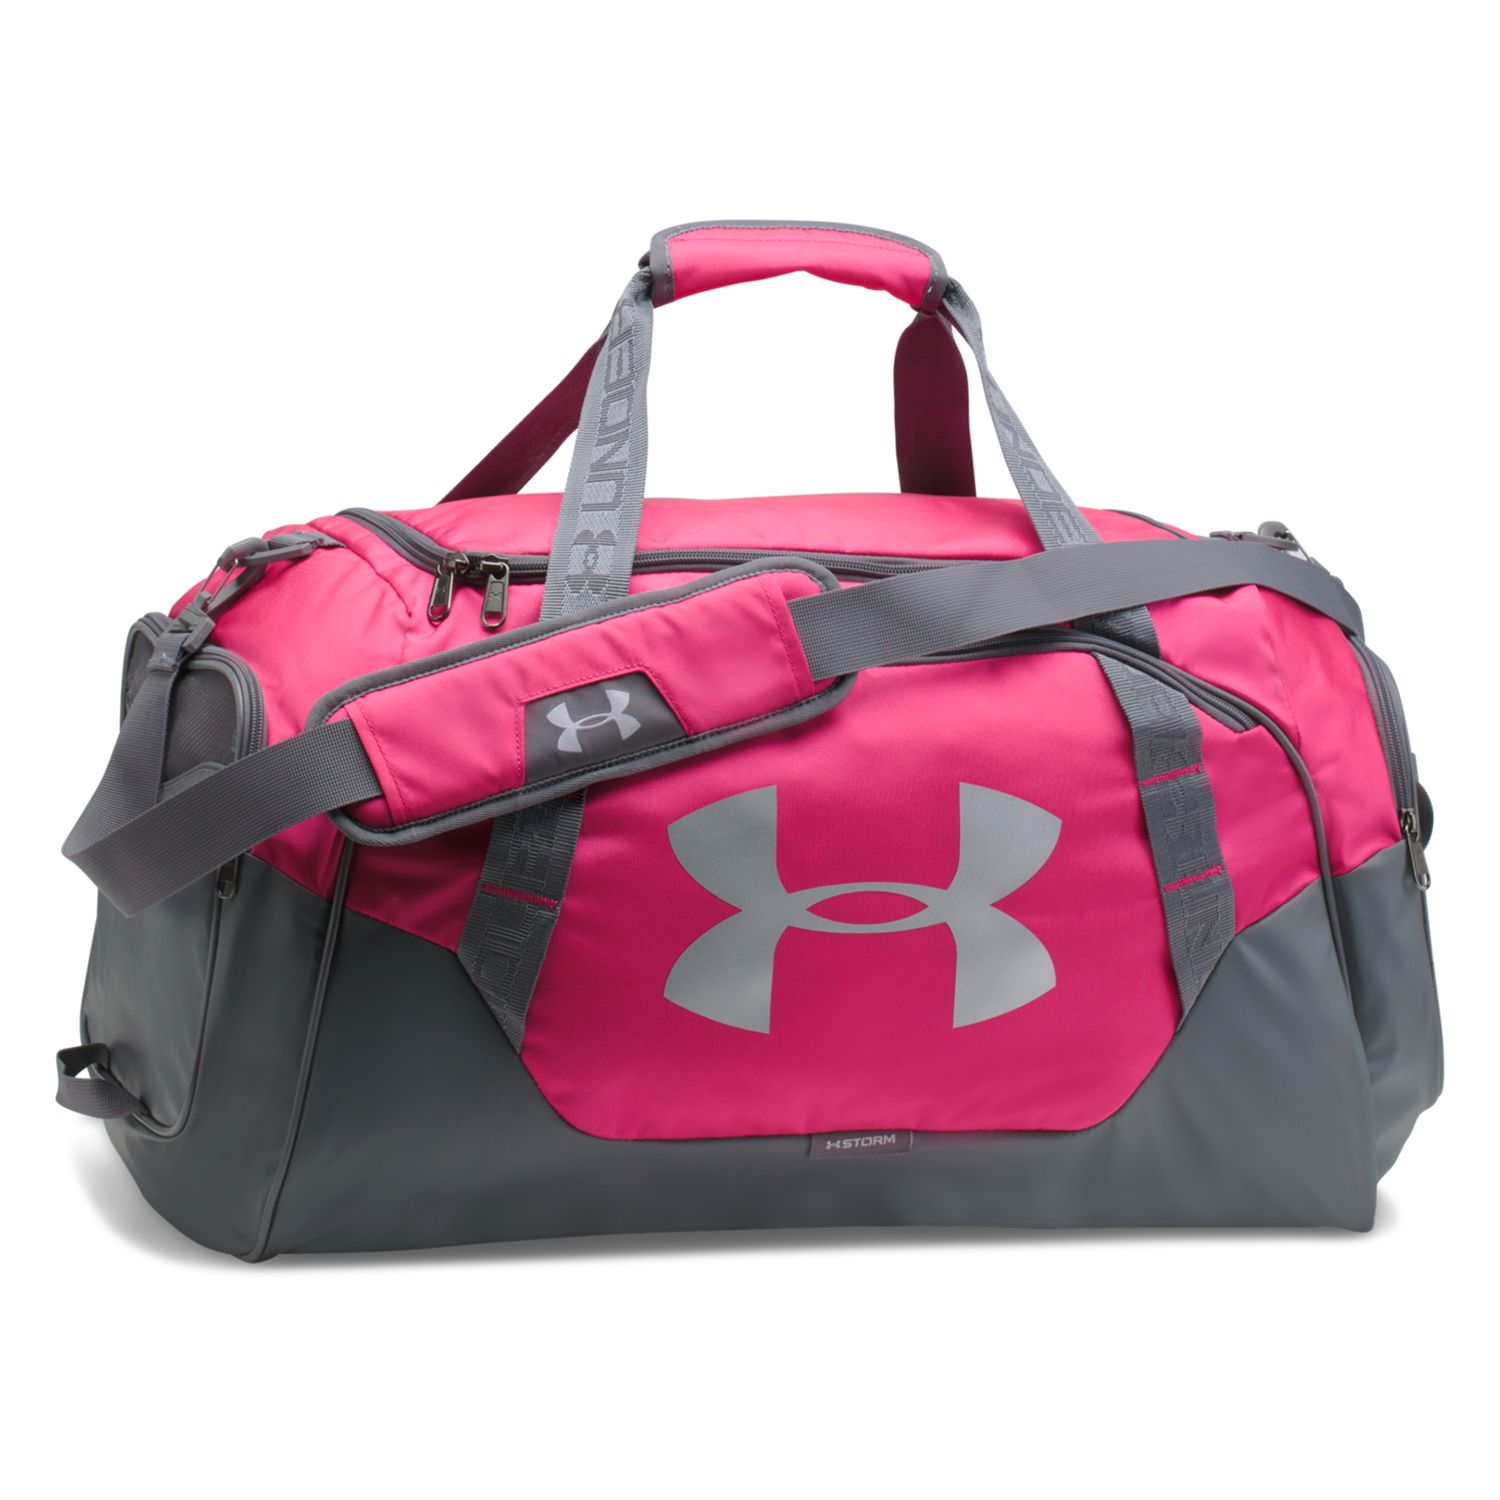 Under Armour Undeniable 3.0 MD Duffel Bag